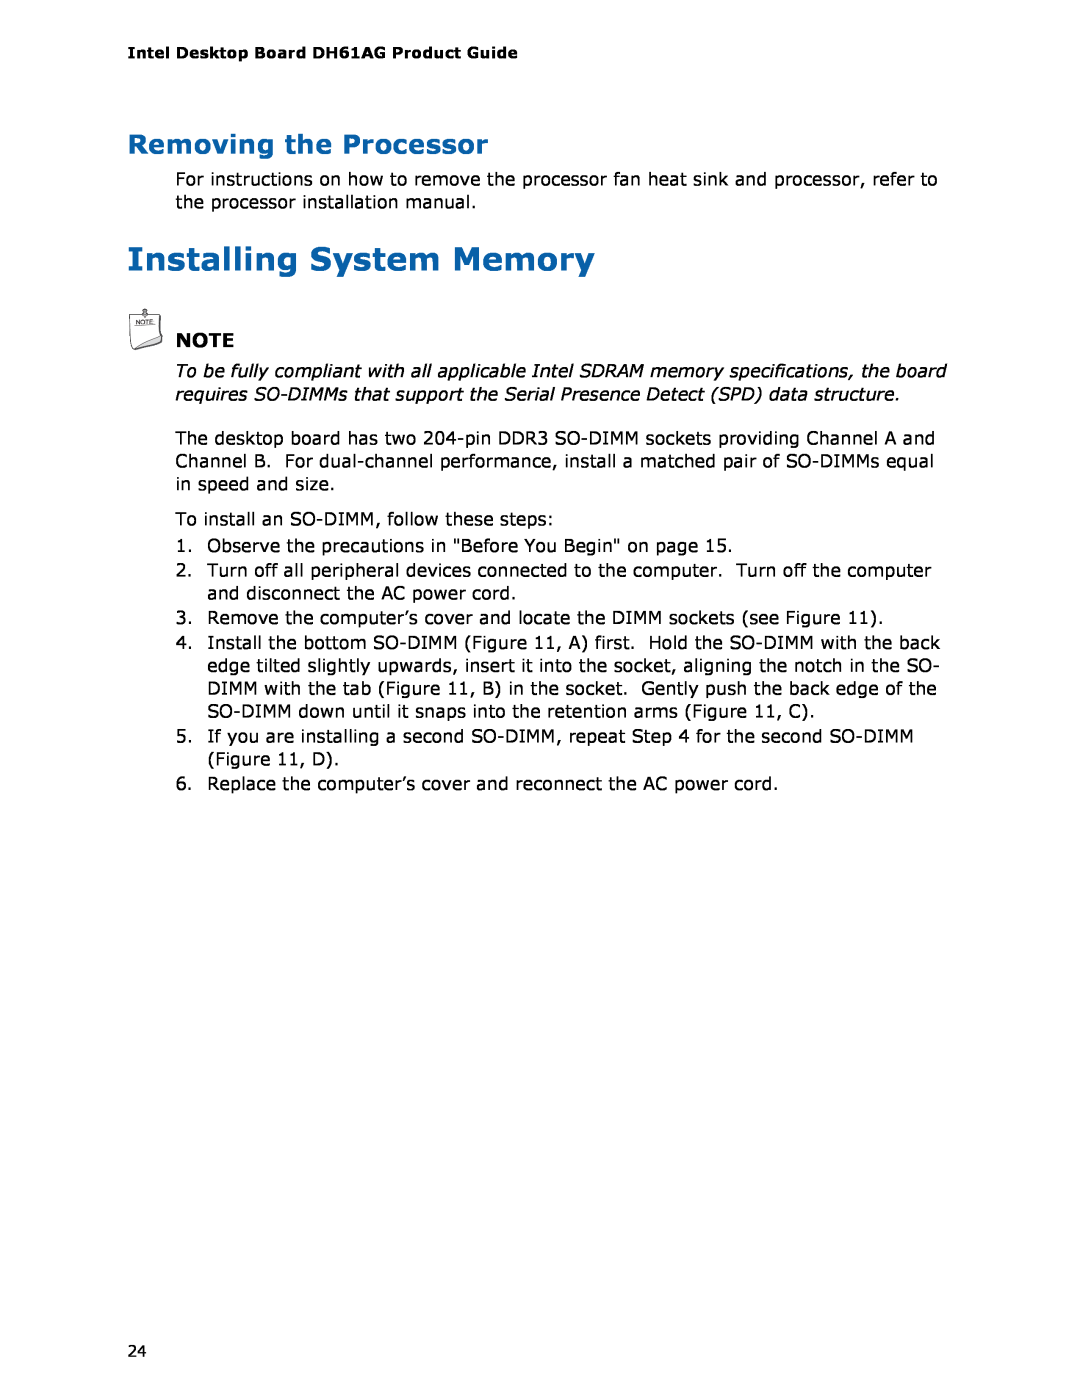 Intel BOXDH61AG manual Installing System Memory, Removing the Processor 